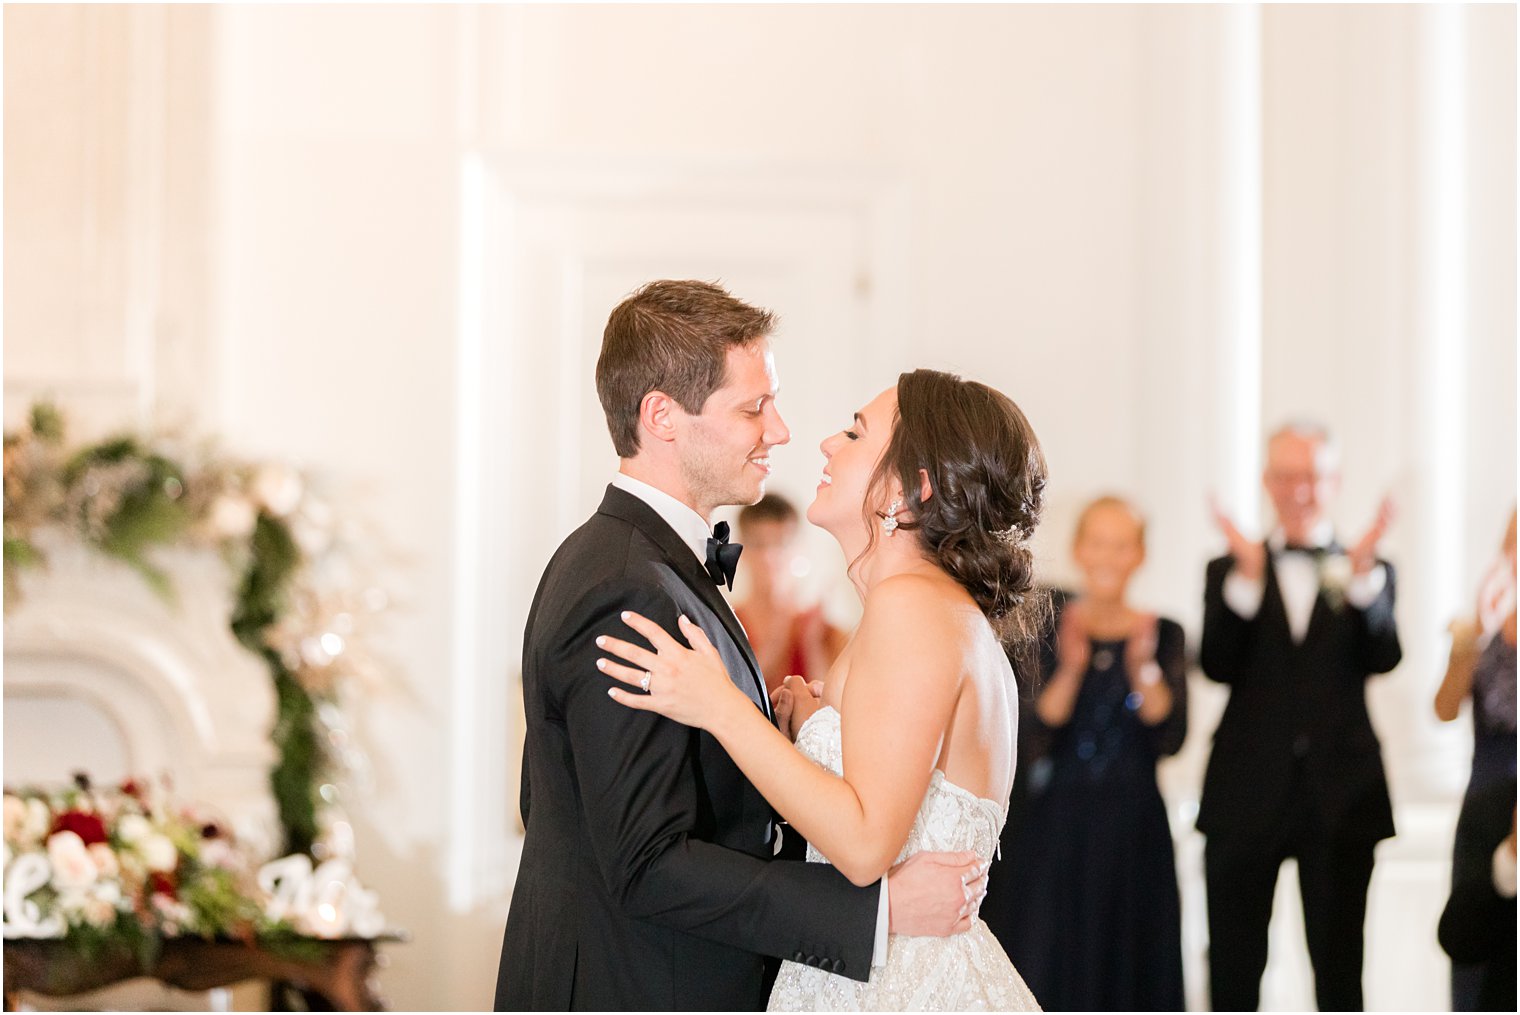 bride smiles at groom during first dance at East Brunswick NJ wedding reception